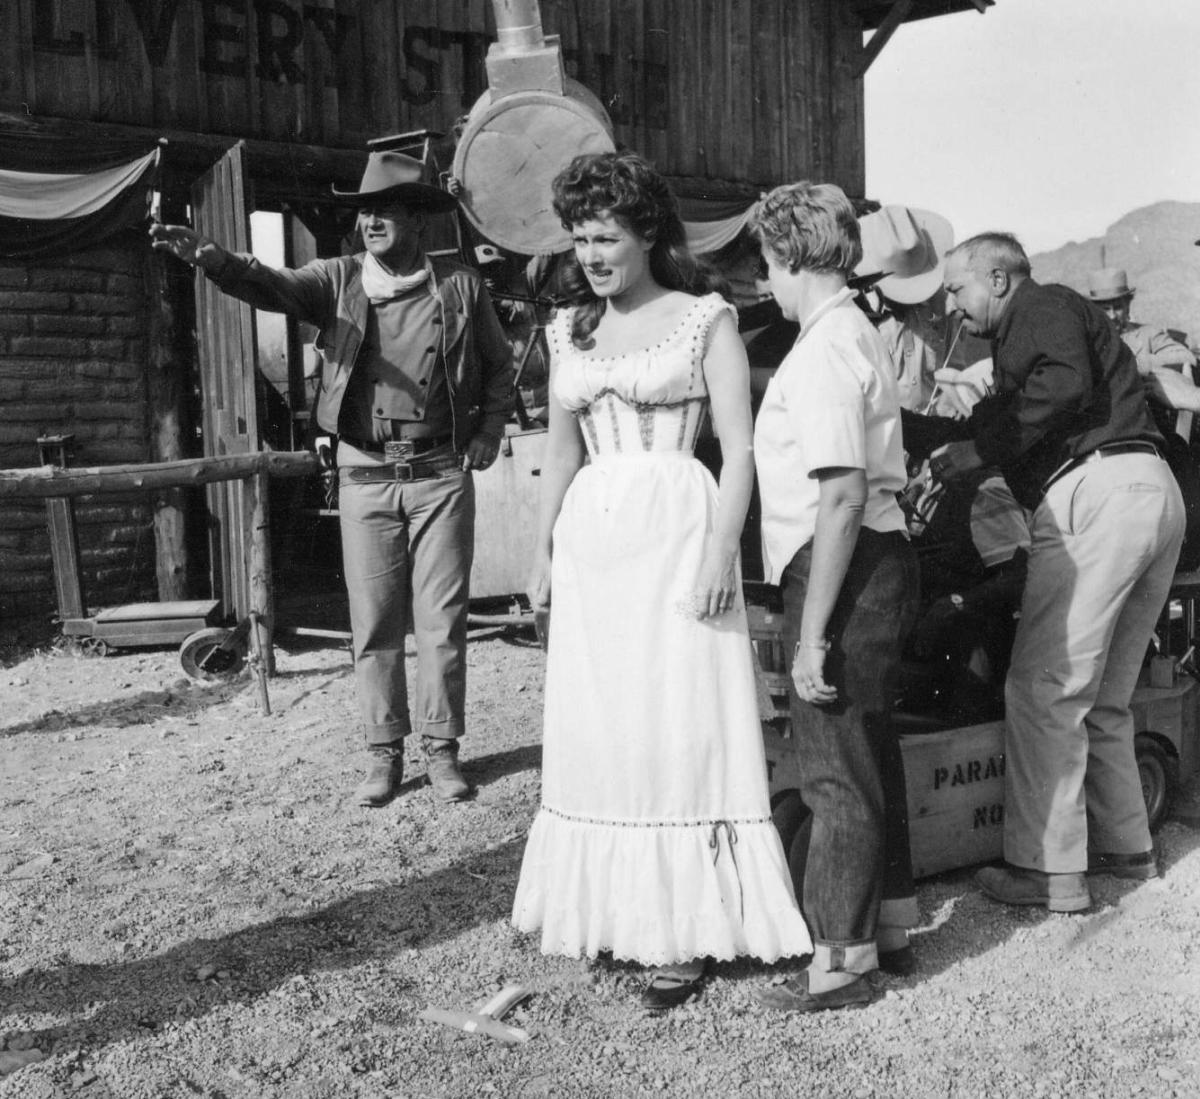 old black and white photo with a women in a white dress and several men in a western setting